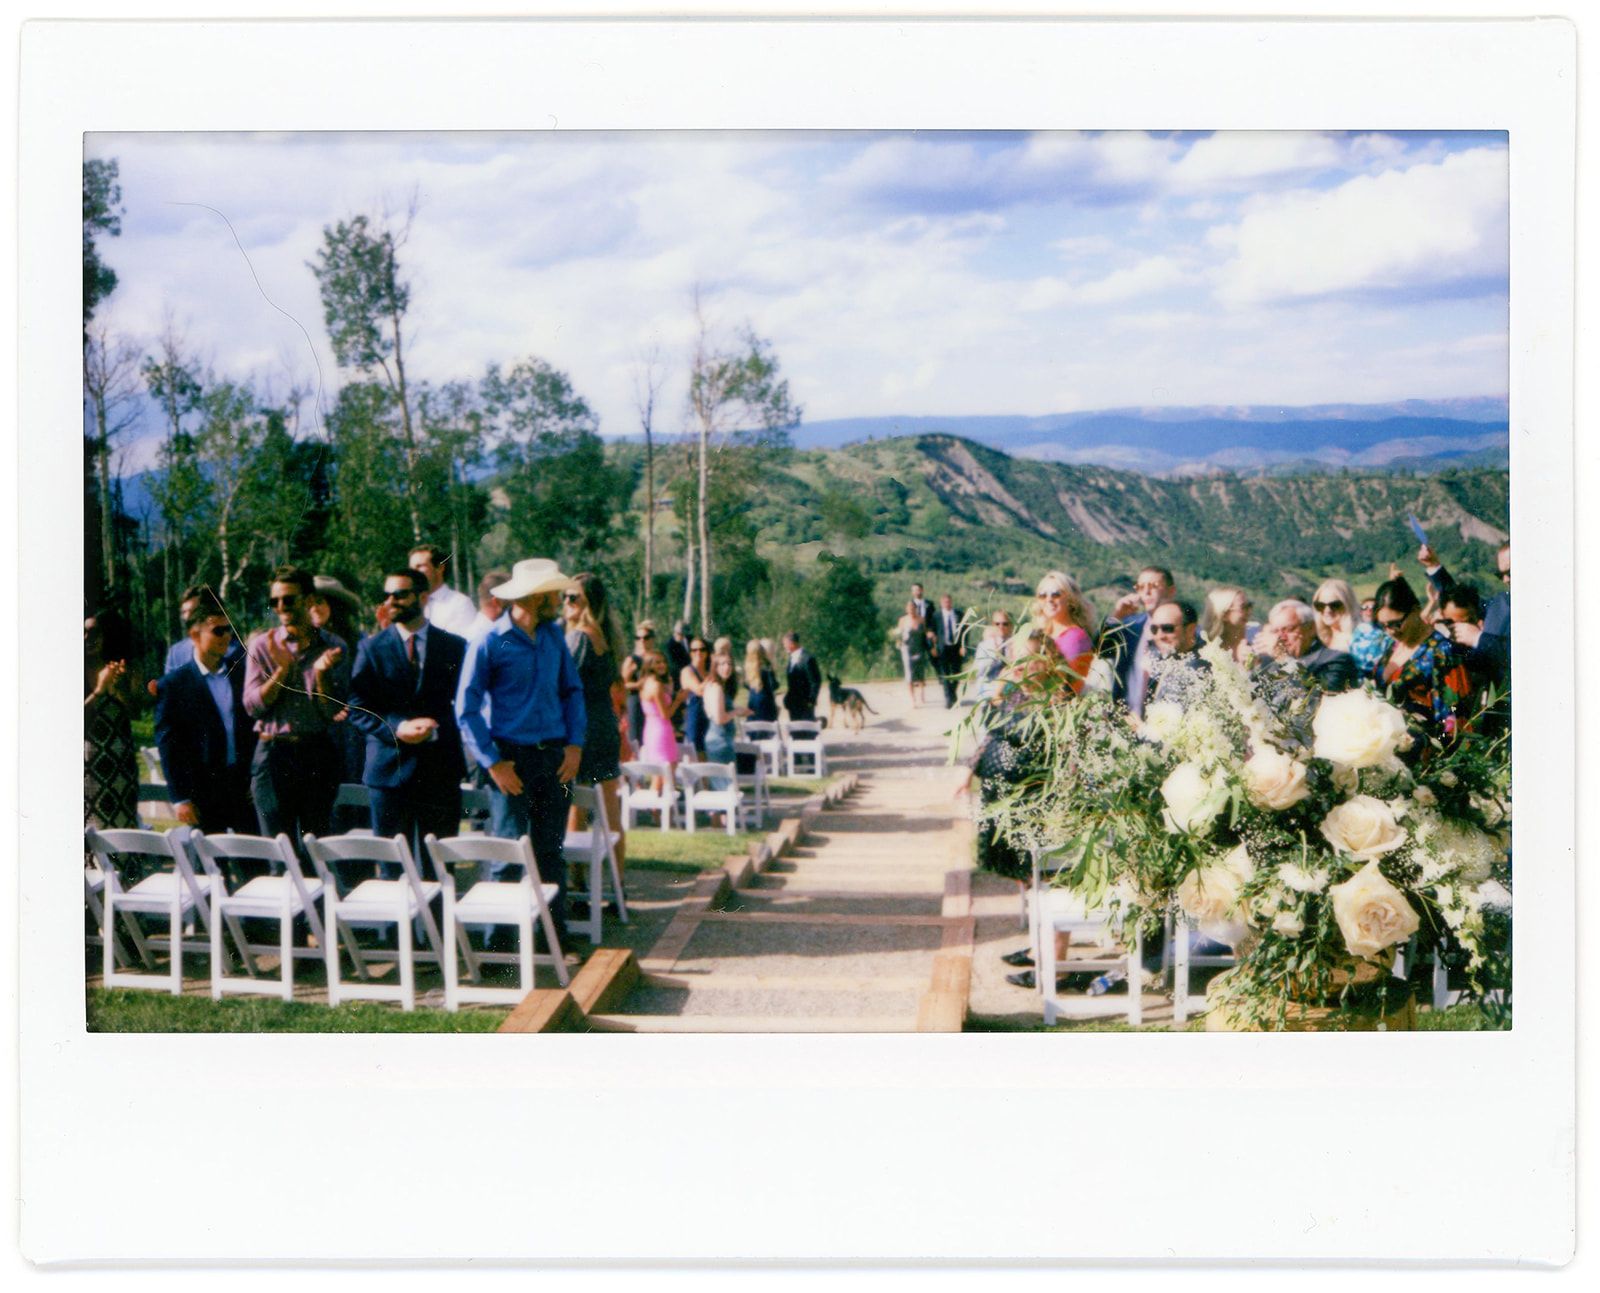 The views of the ceremony location of Limelight wedding terrace. Mountain views and wedding guests. Shot on polaroid.